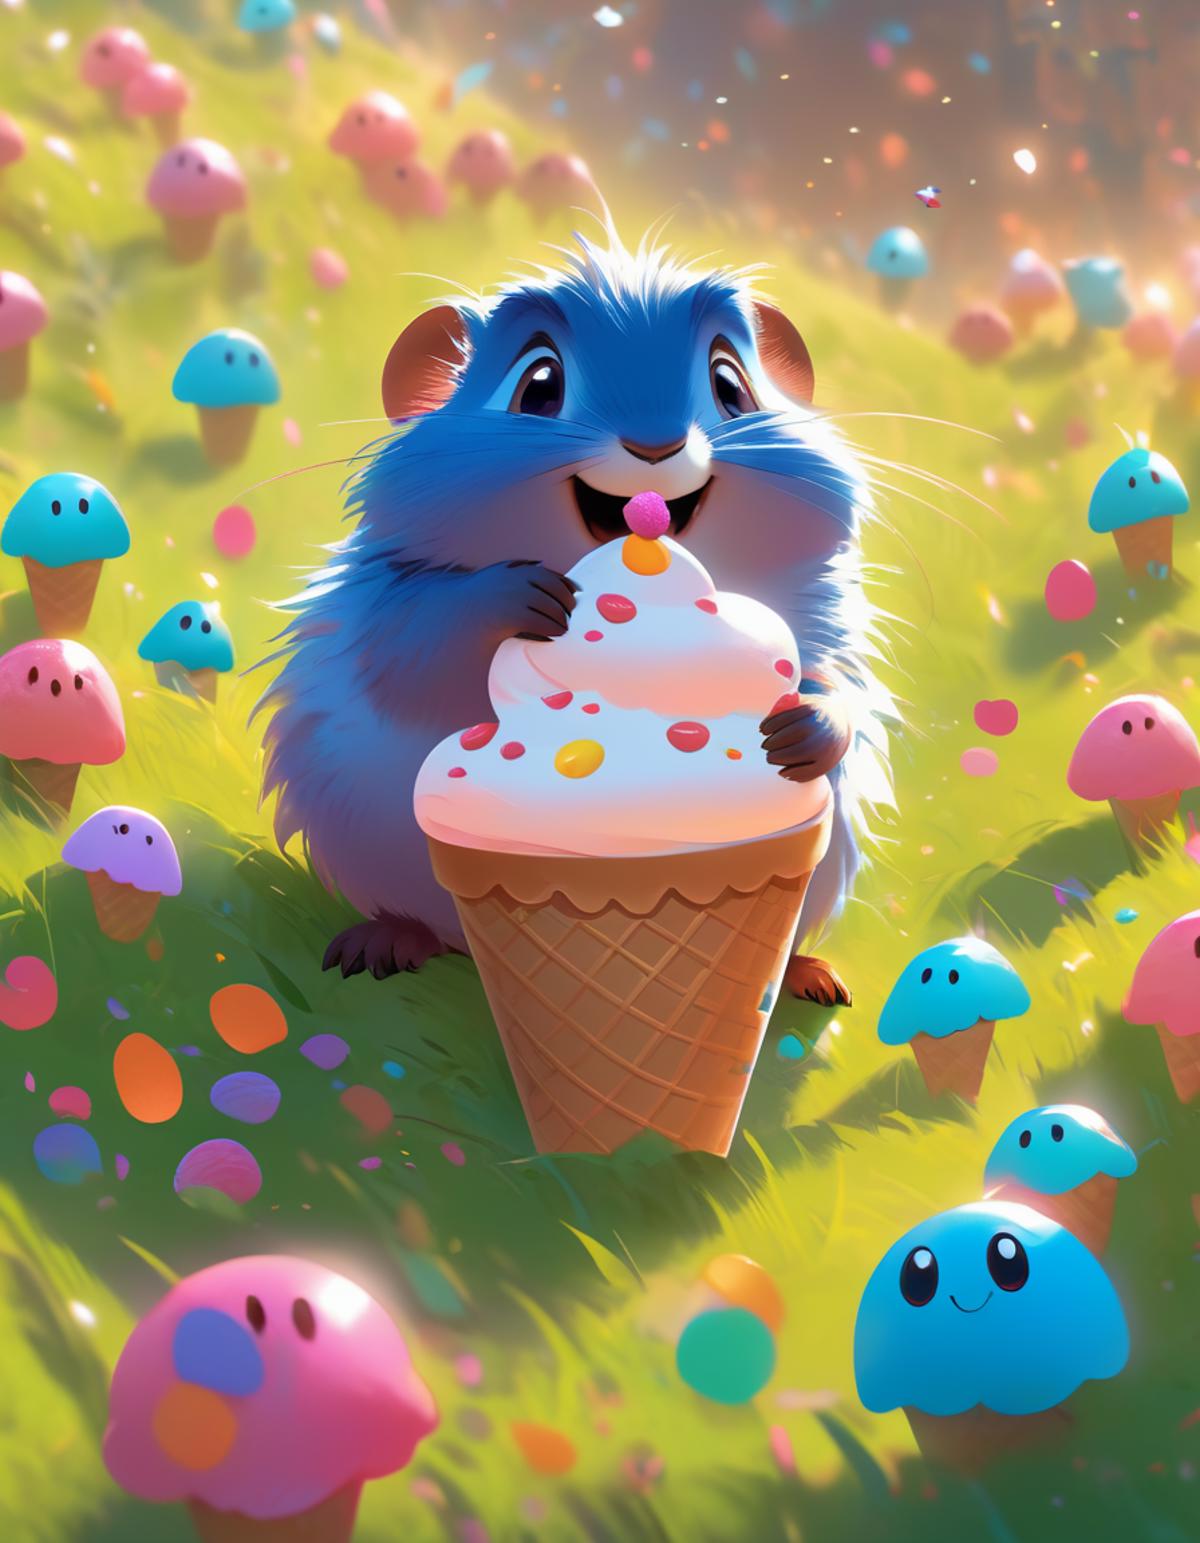 Giant Lemming,  holding small ice cream,  about to bite,  bright-colored eyes,  candy meadows,  tasty candy growing in gra...